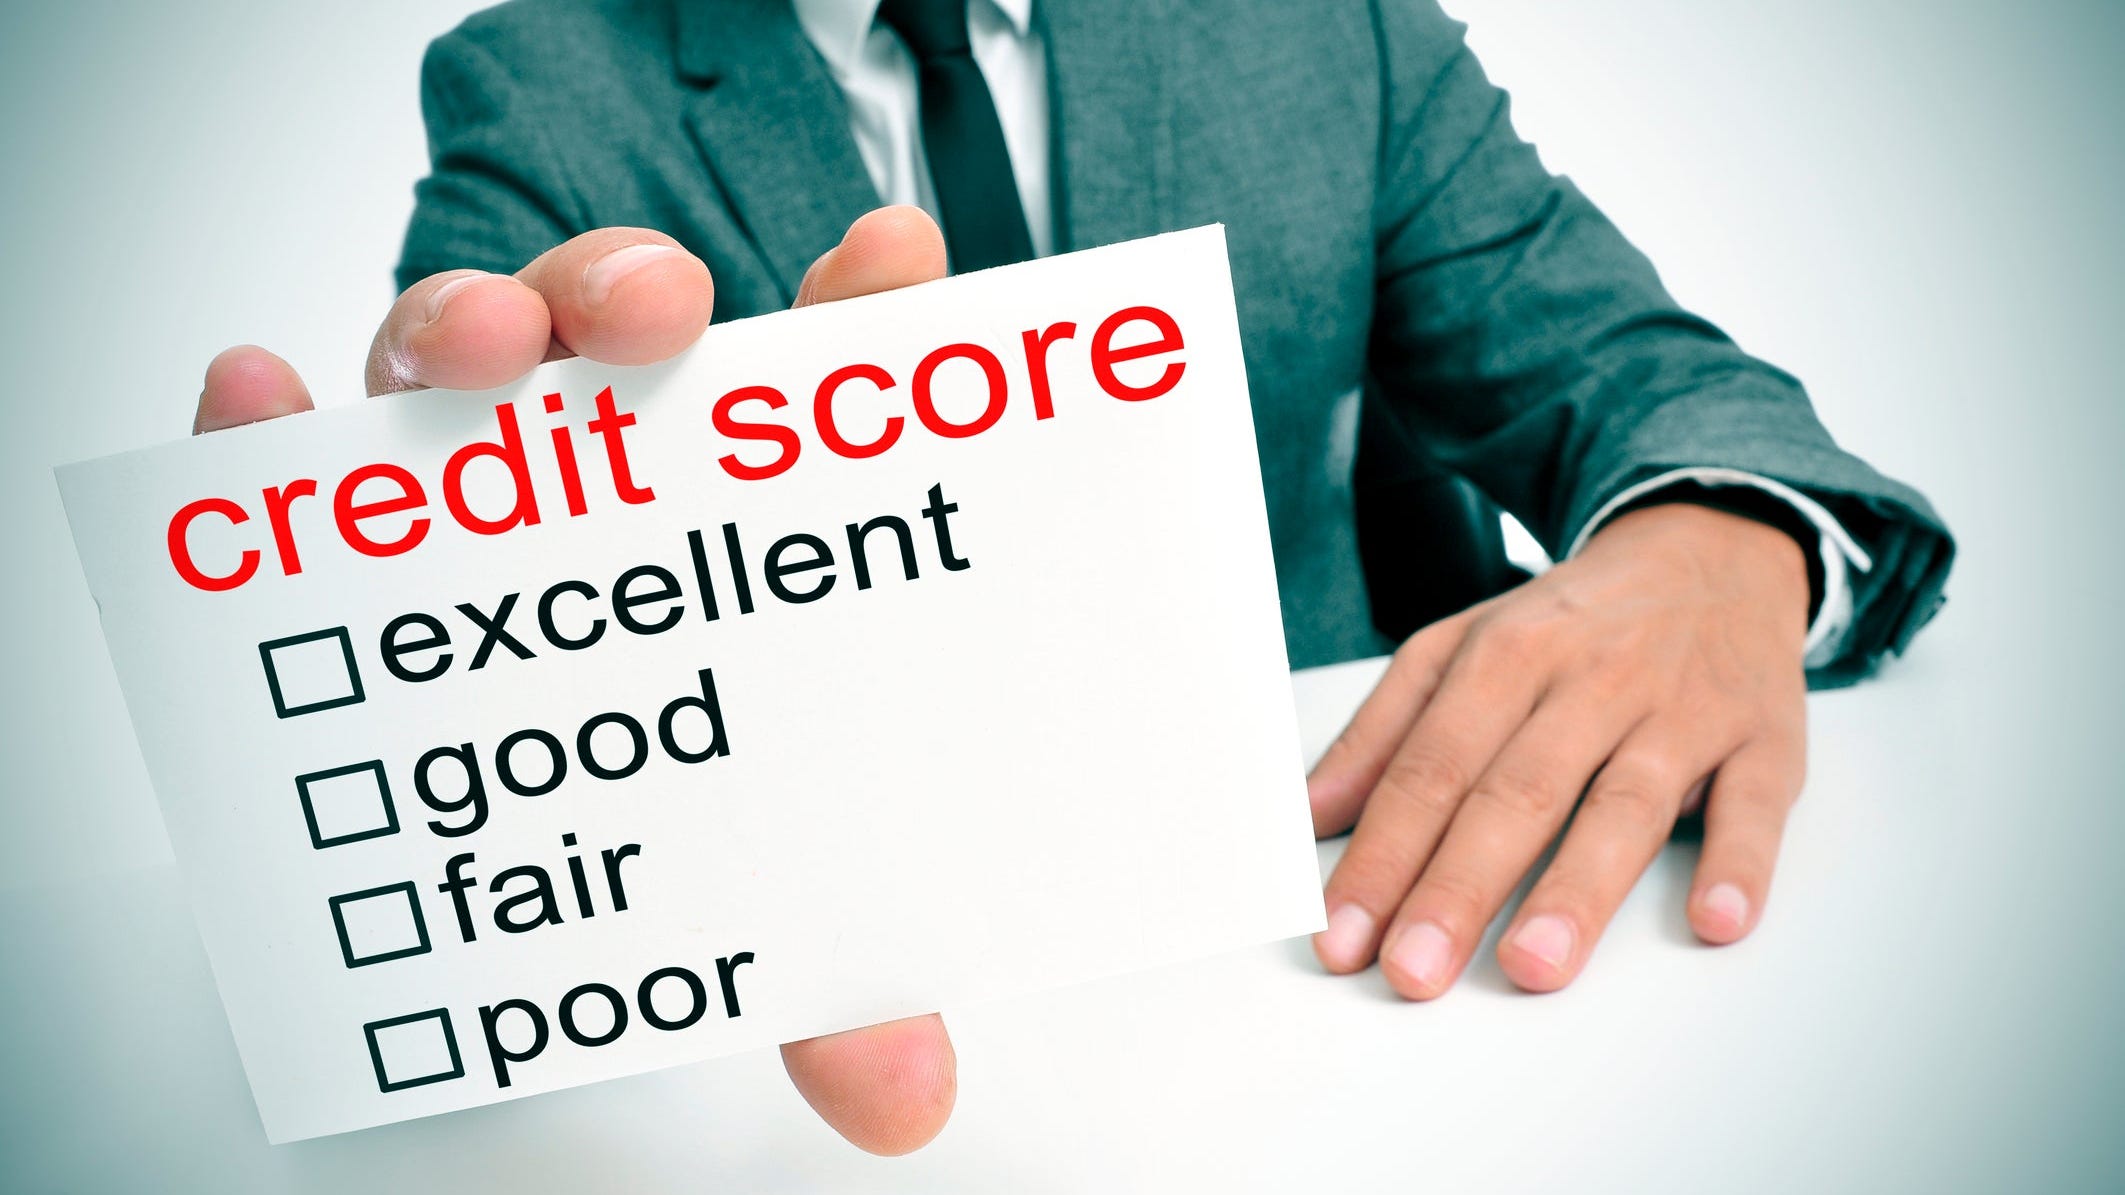 Credit score: How it's calculated and how to boost it